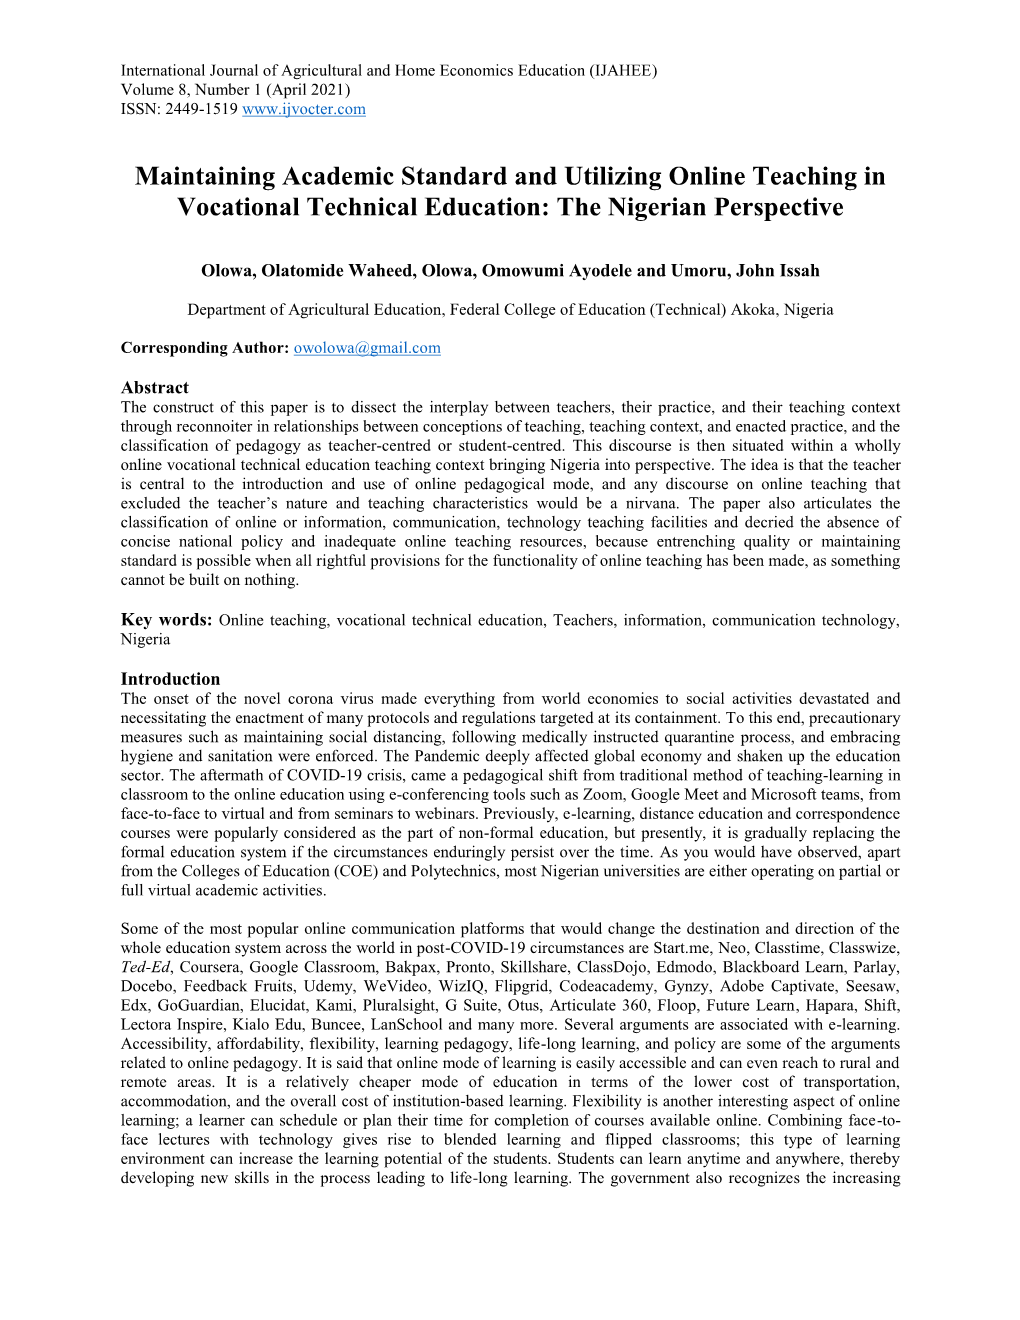 Maintaining Academic Standard and Utilizing Online Teaching in Vocational Technical Education: the Nigerian Perspective